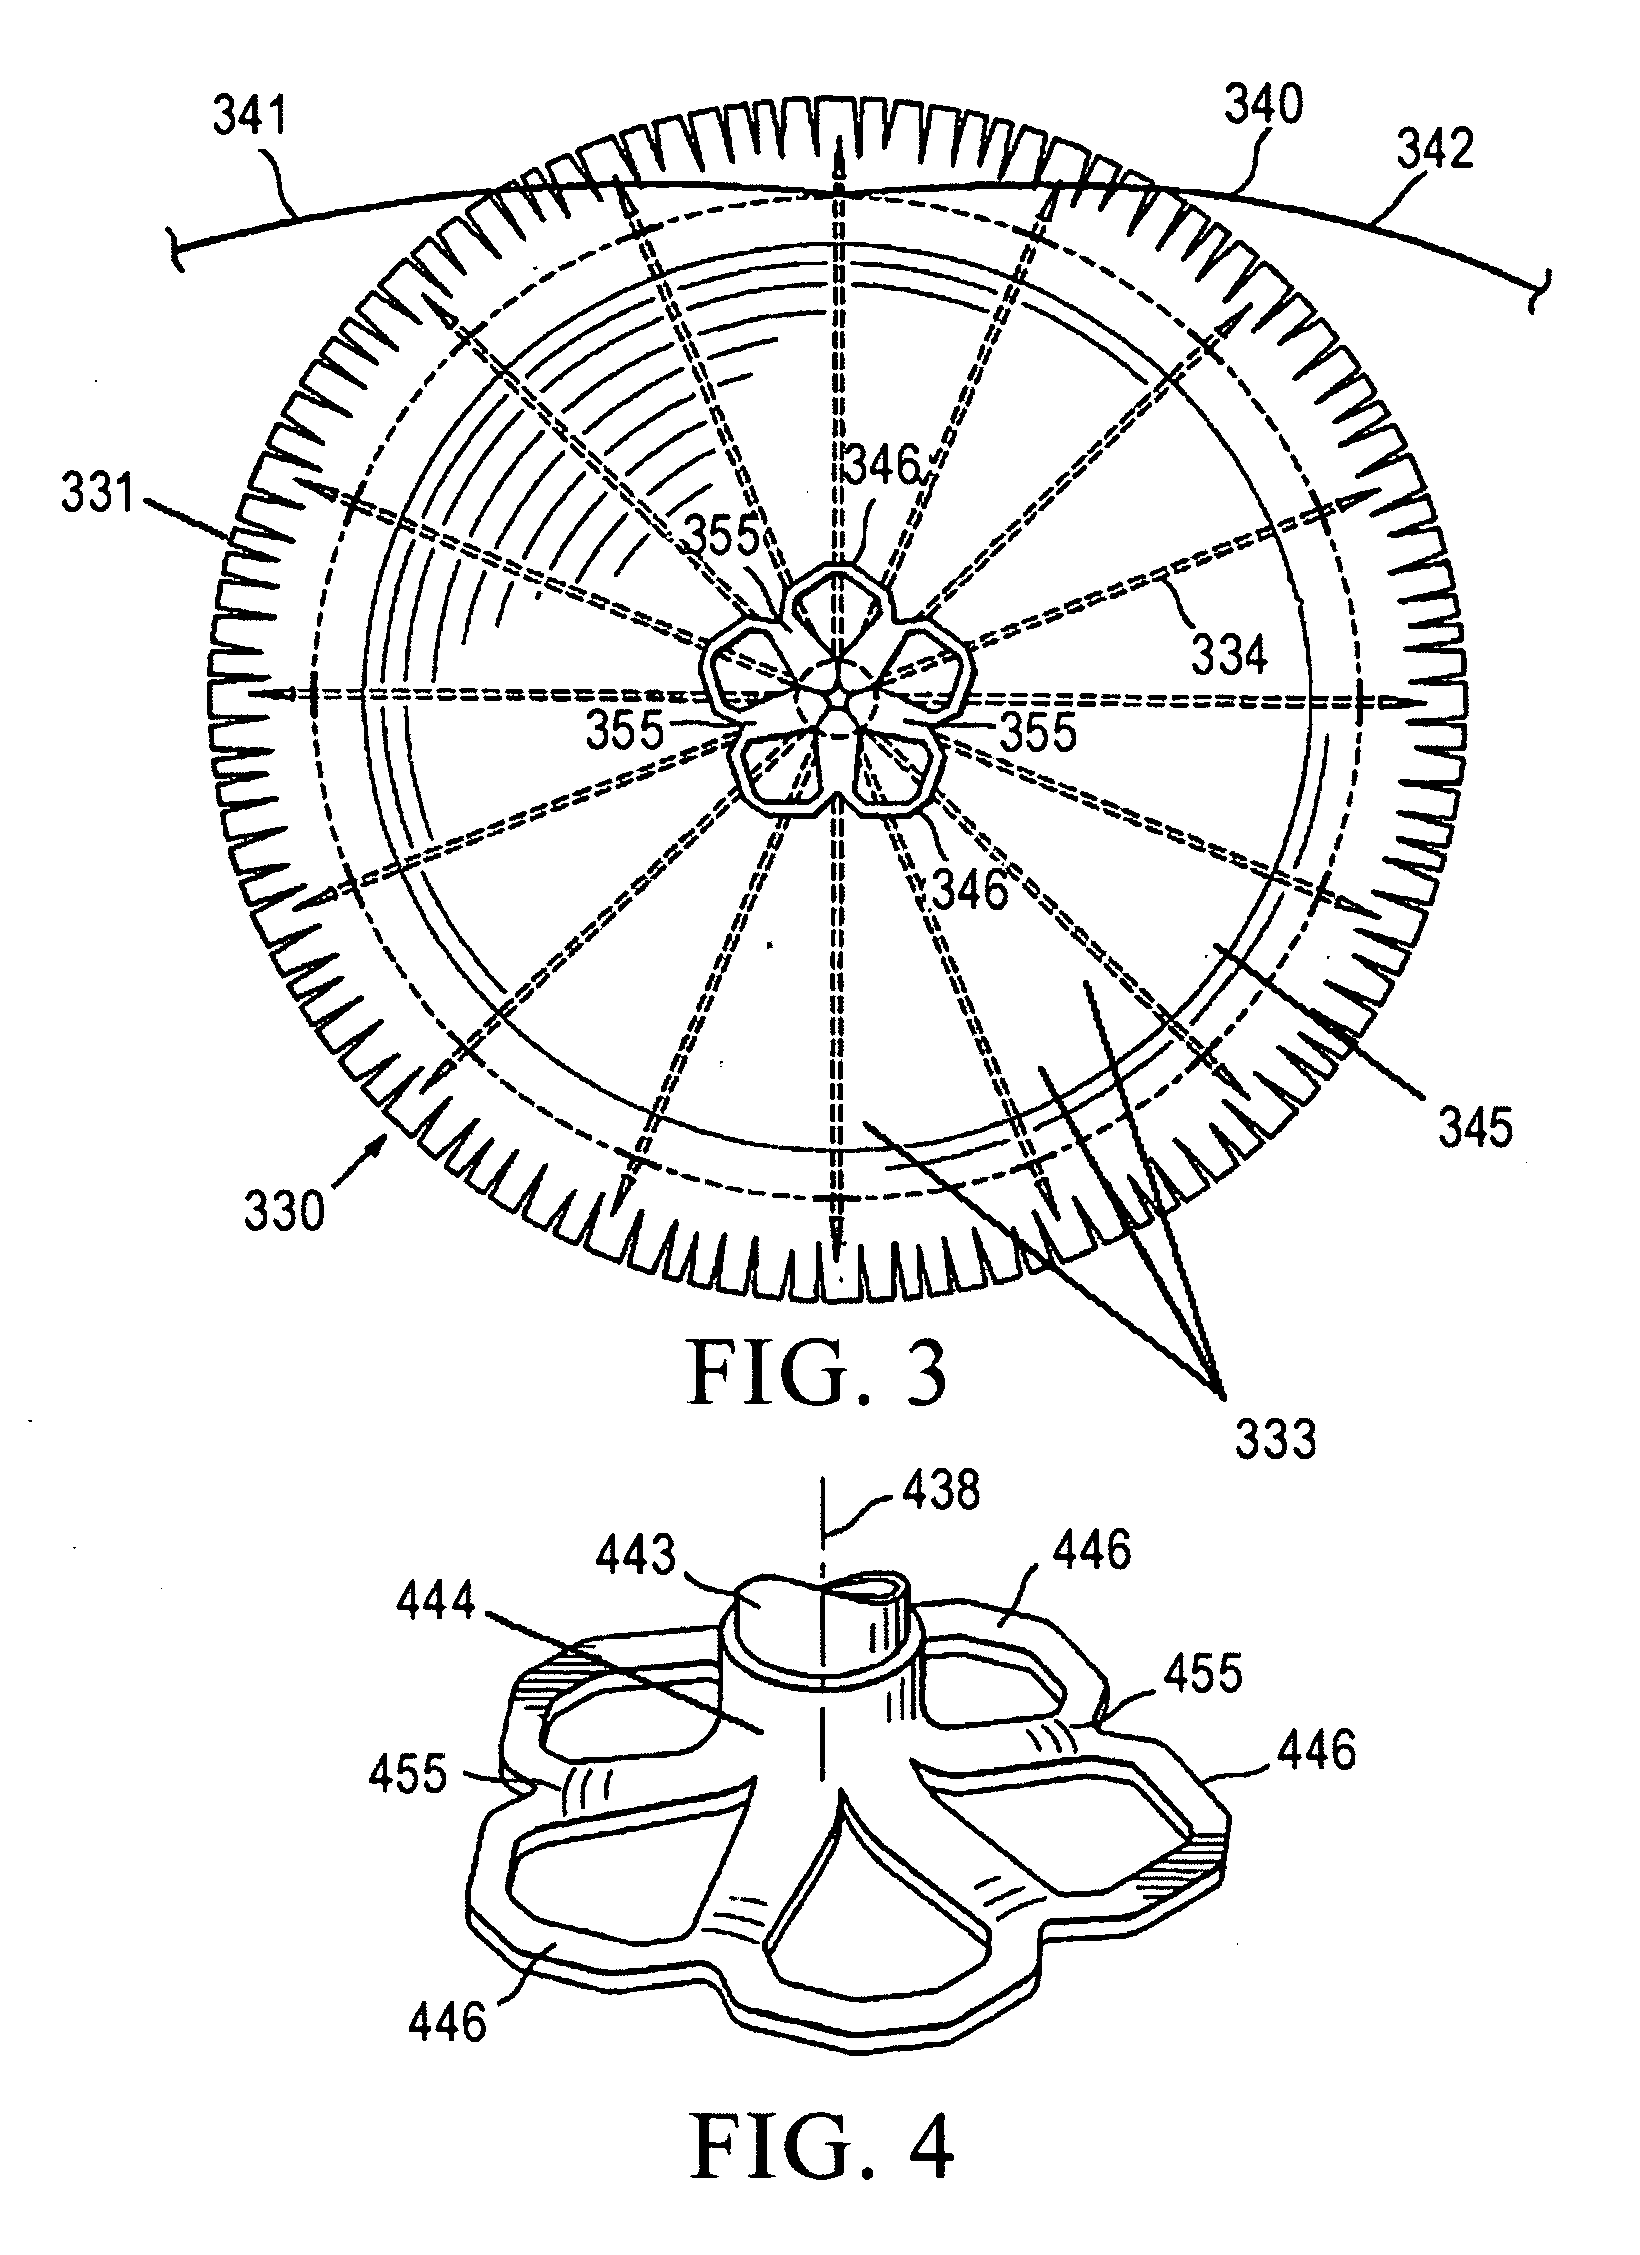 Cardiac device and methods of use thereof